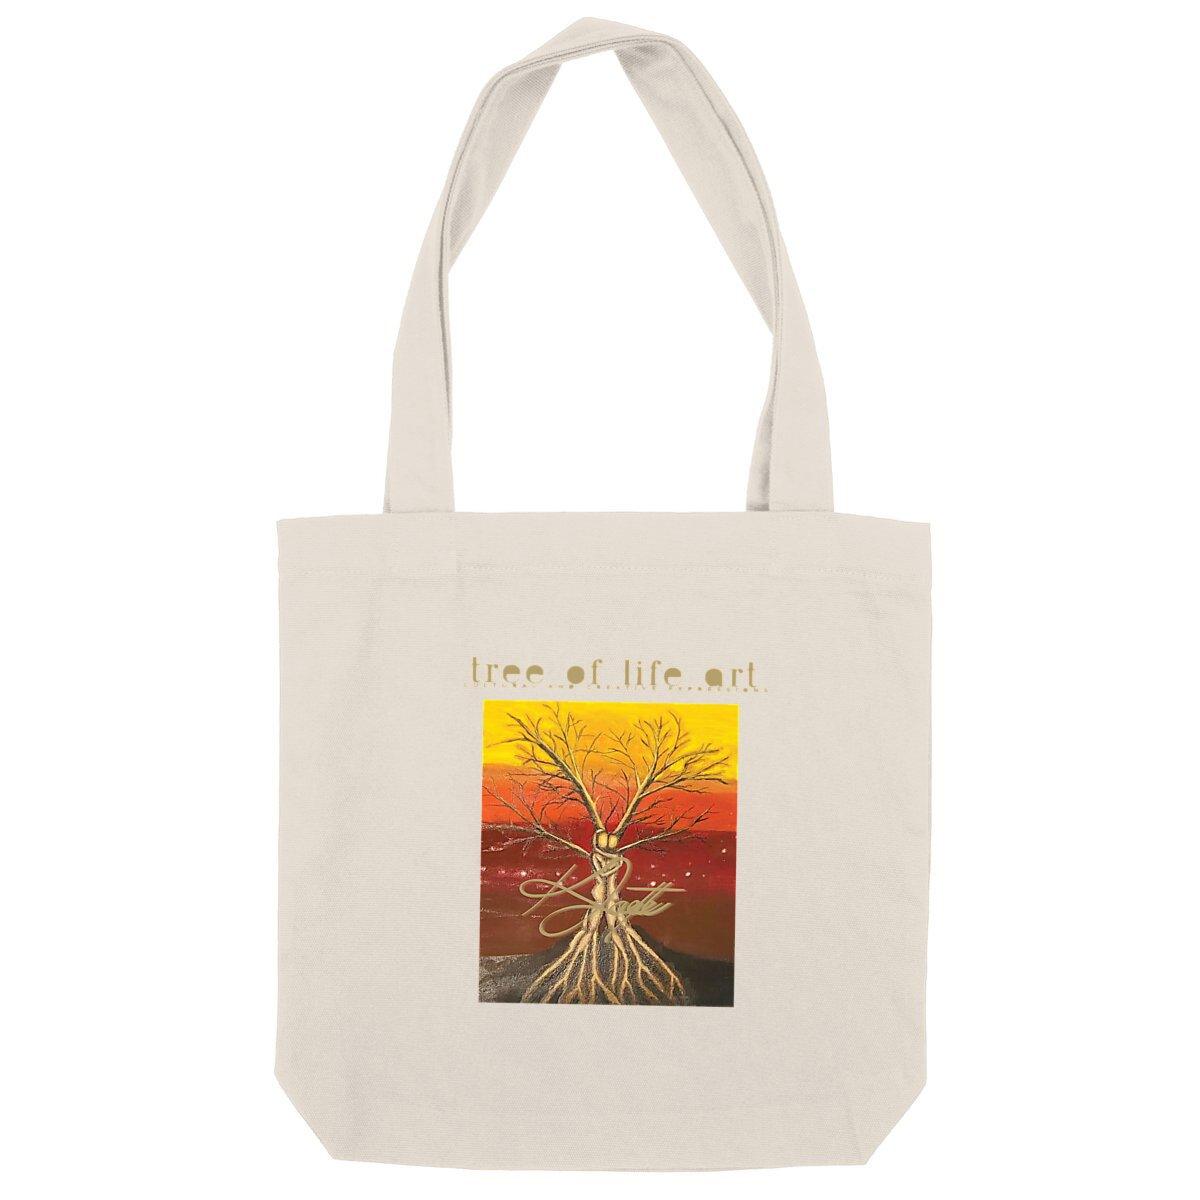 Tree of Life Premium Heavyweight Totebag, crafted from recycled materials, designed by Tree of Life Art, offers durability and sustainability